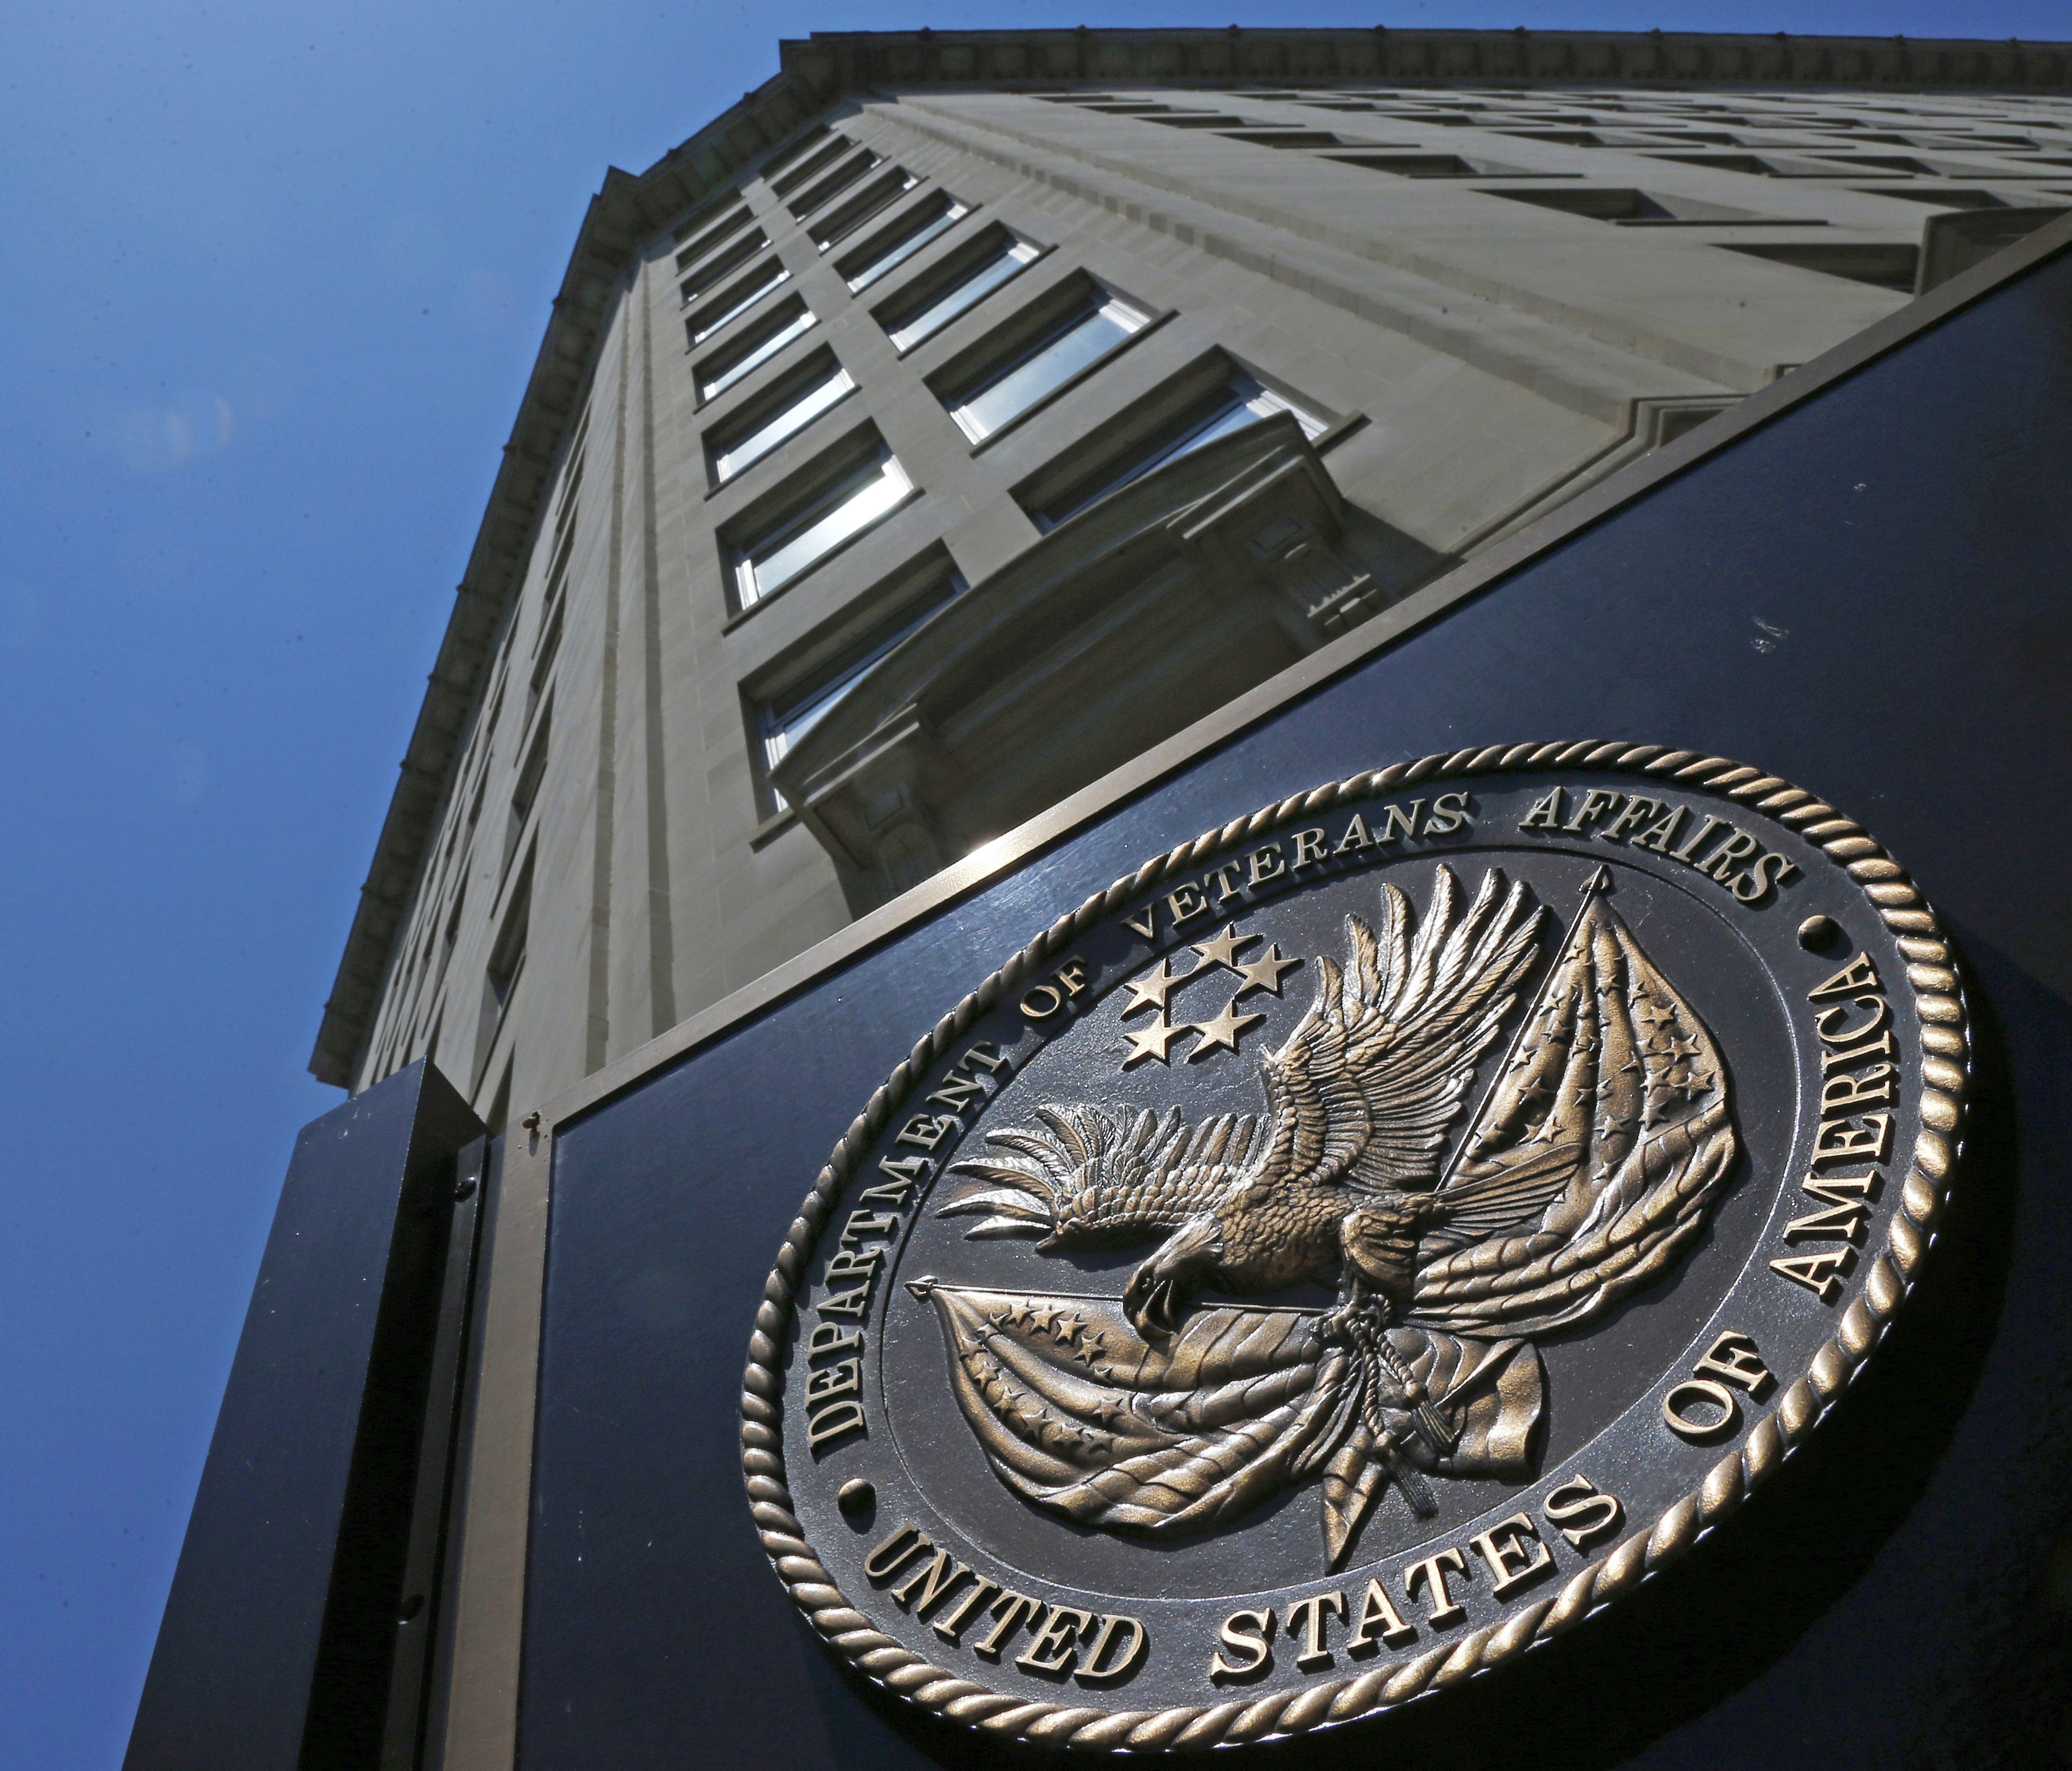 In this June 21, 2013, file photo, the seal affixed to the Department of Veterans Affairs building in Washington is shown.